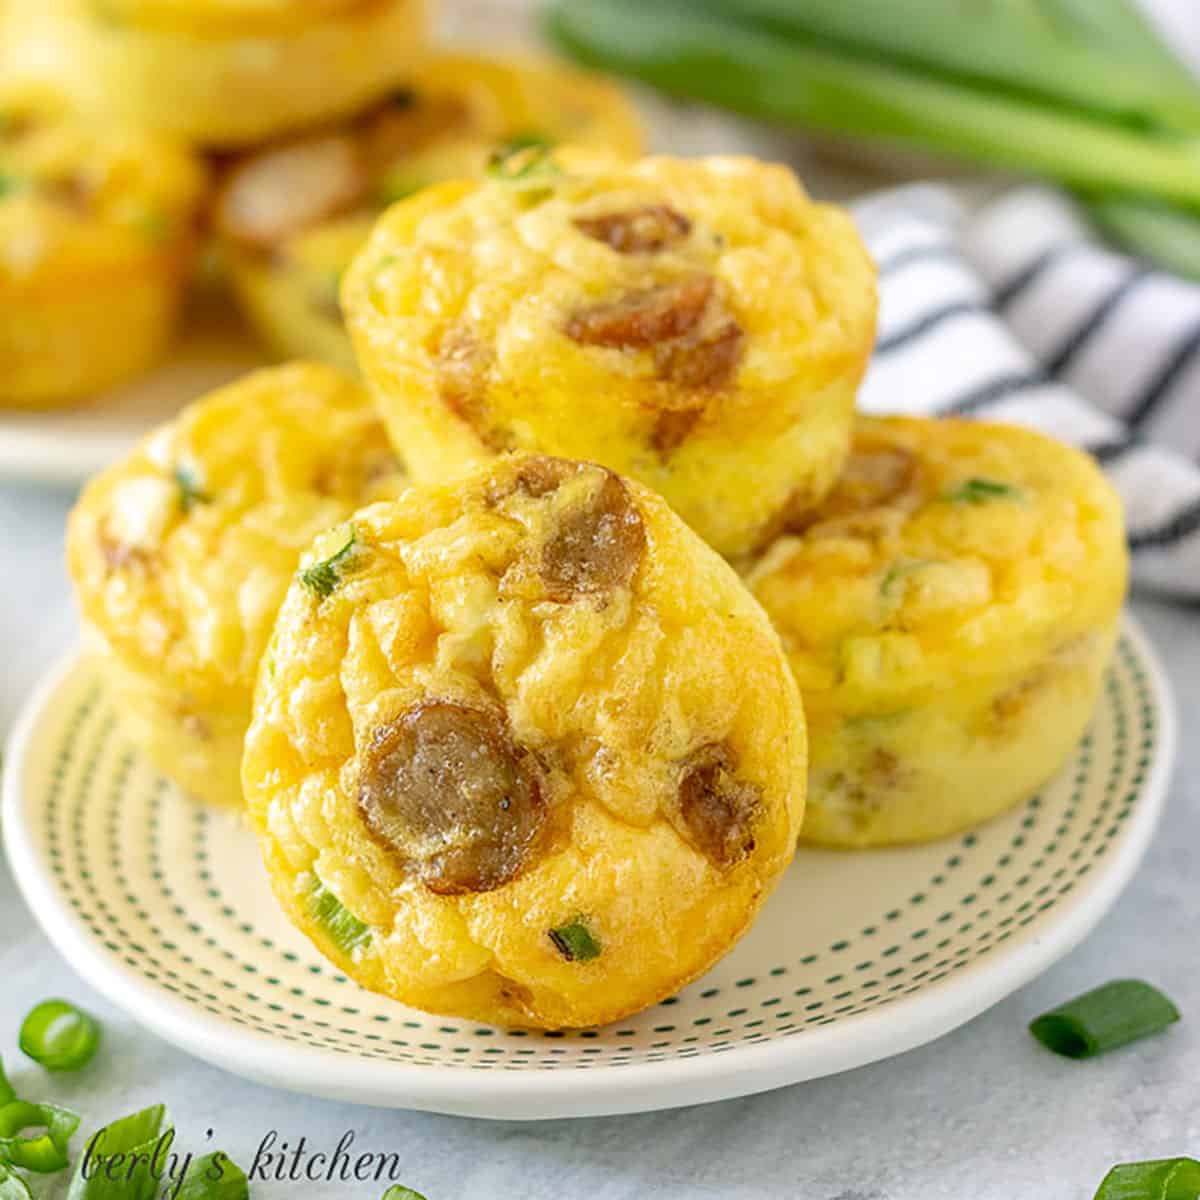 Plate of sausage, egg, and cheese muffins surrounded by chopped green onions.